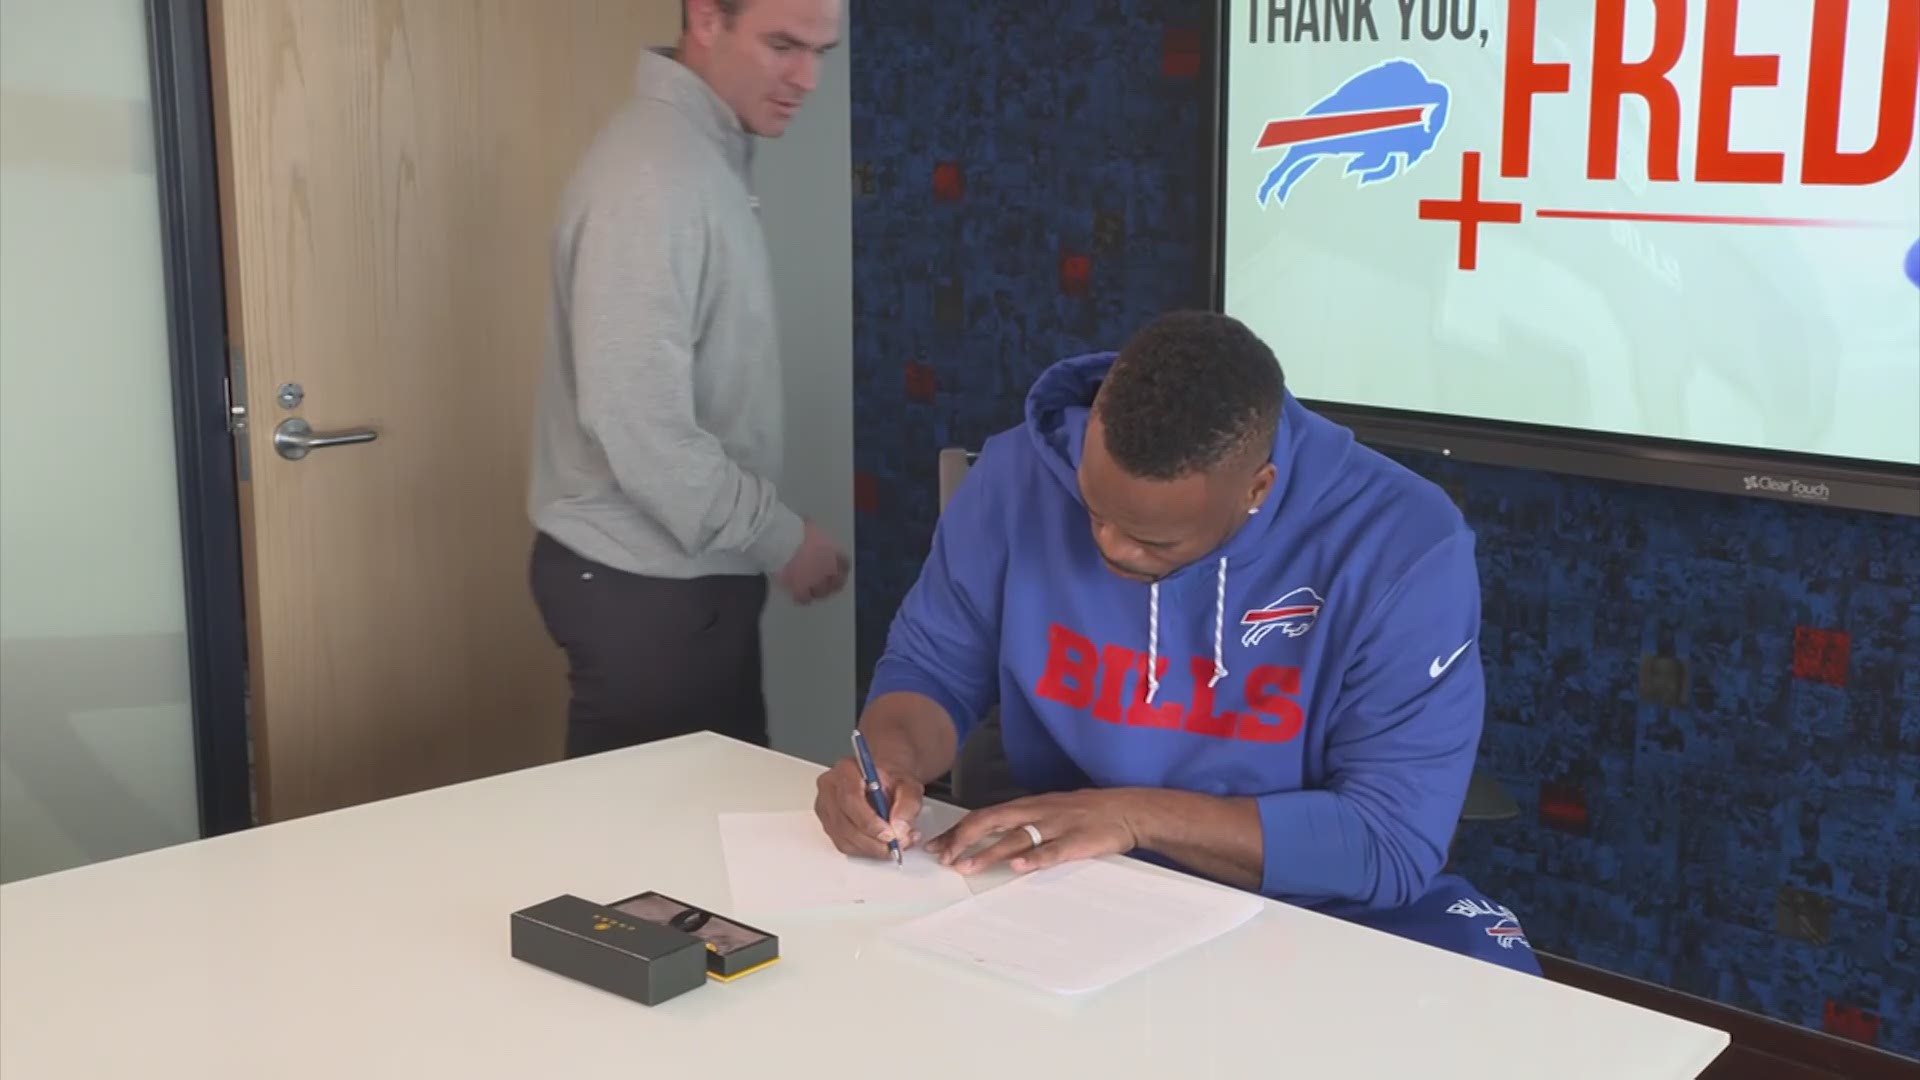 Former Bills running back, Fred Jackson signed a one-day contract to officially retire as a Buffalo Bill.